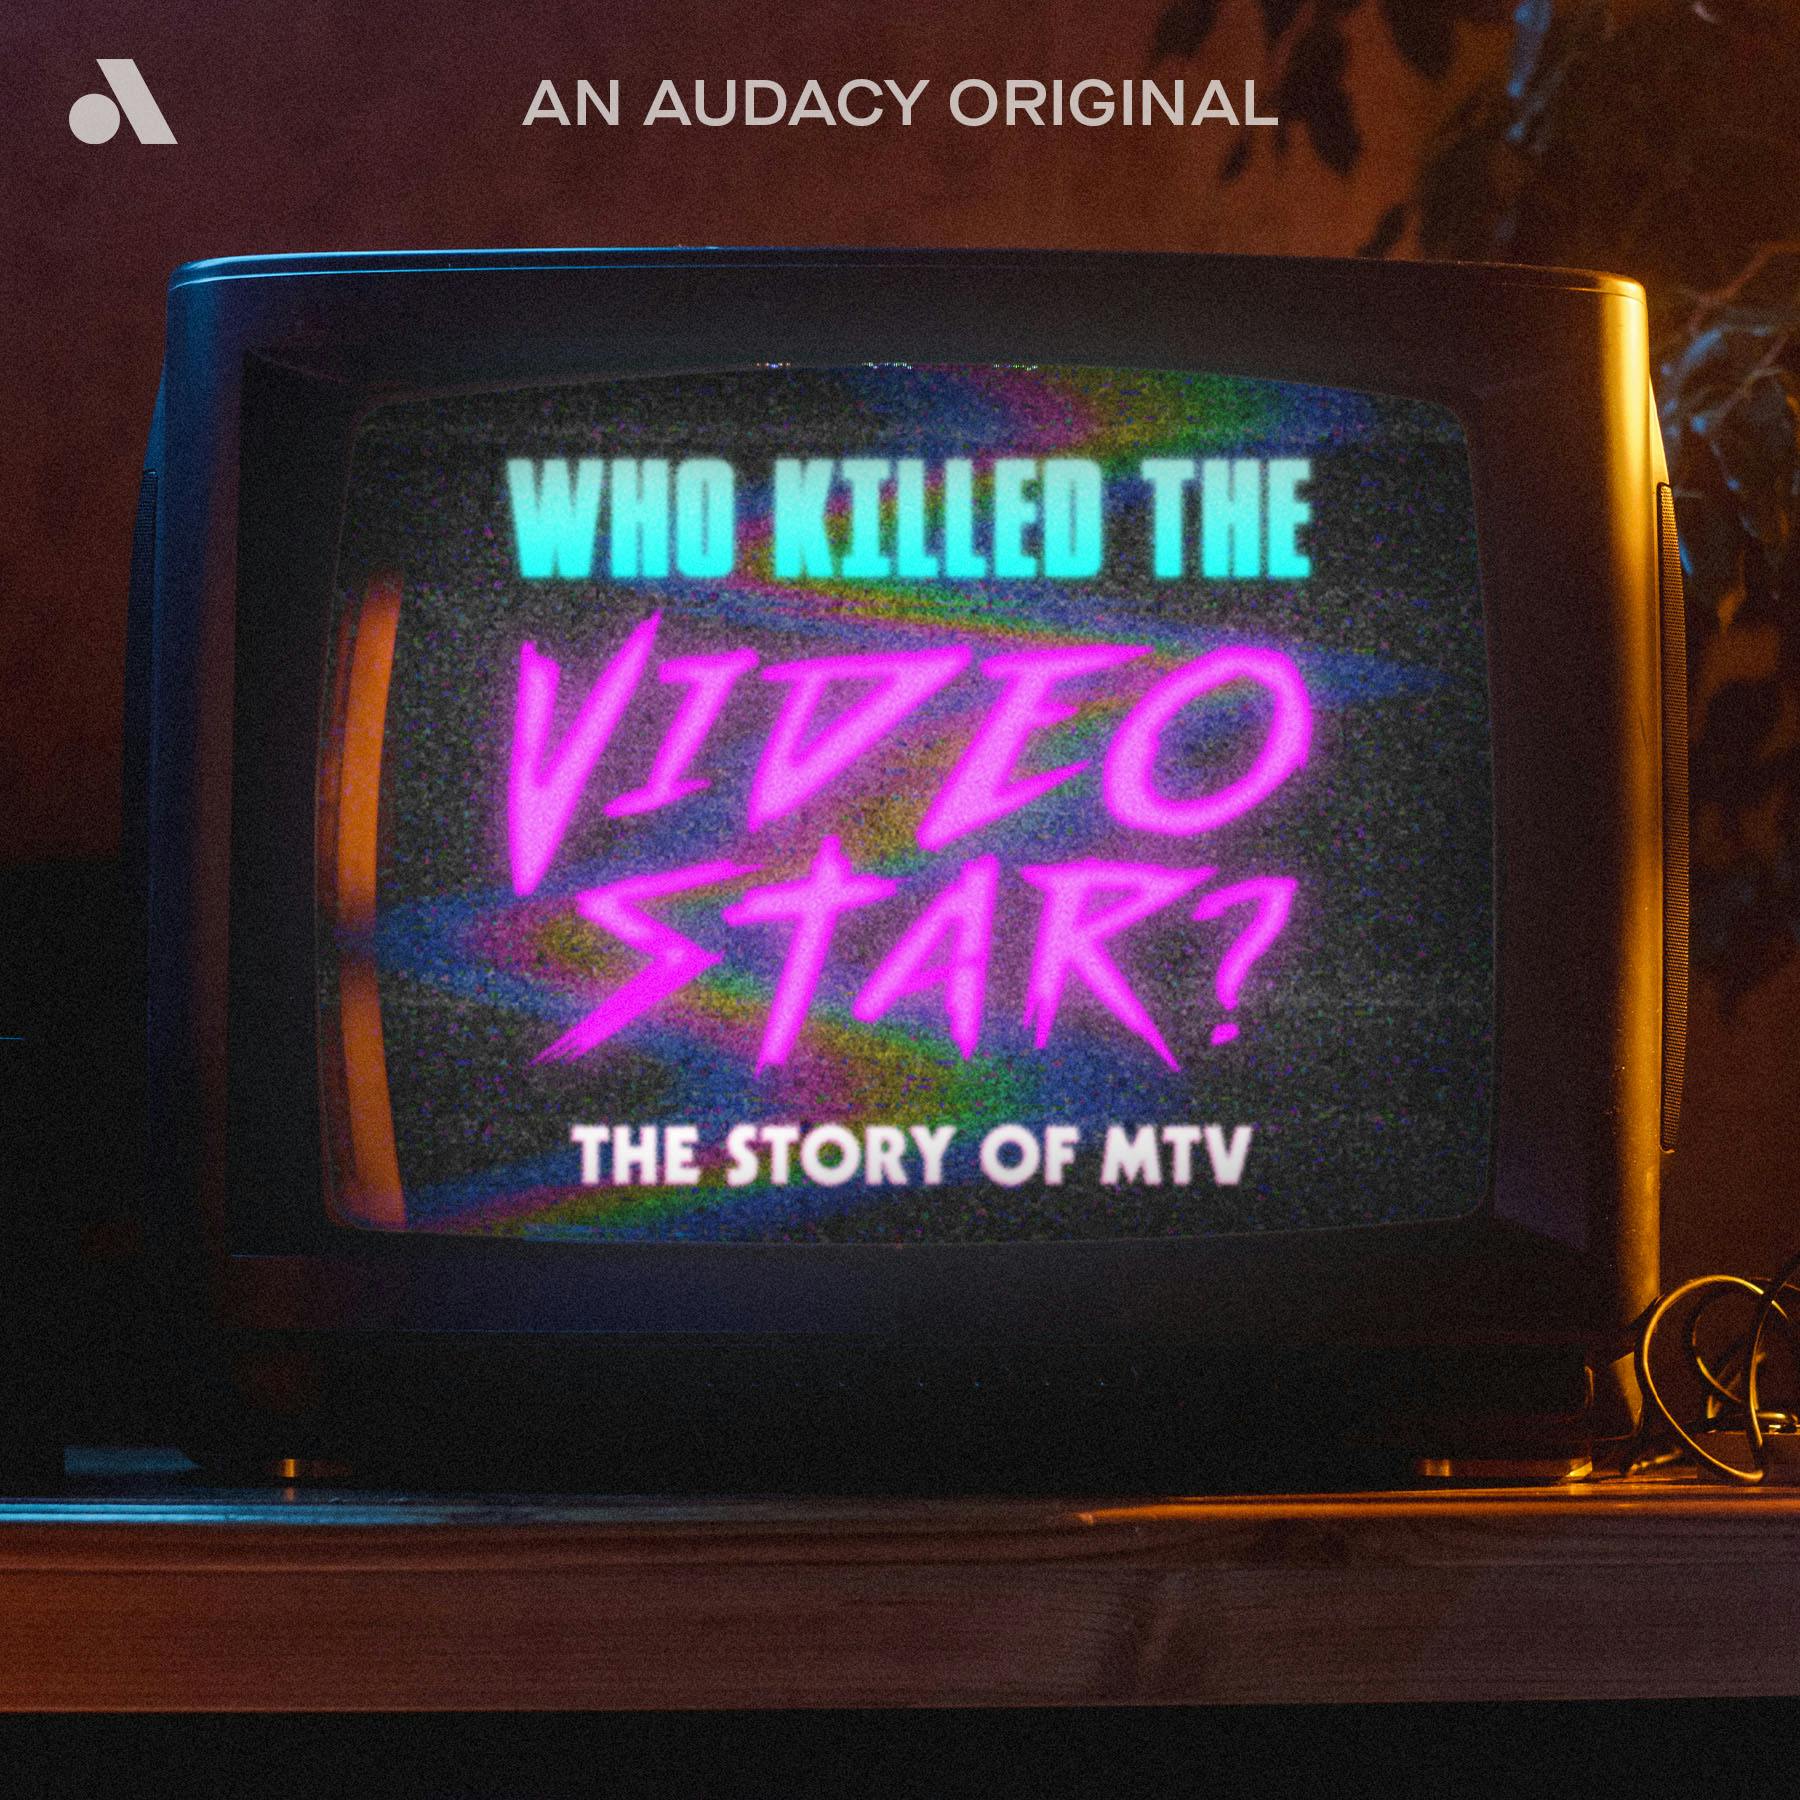 Who Killed the Video Star: The Story of MTV | Look At Me by Audacy Studios